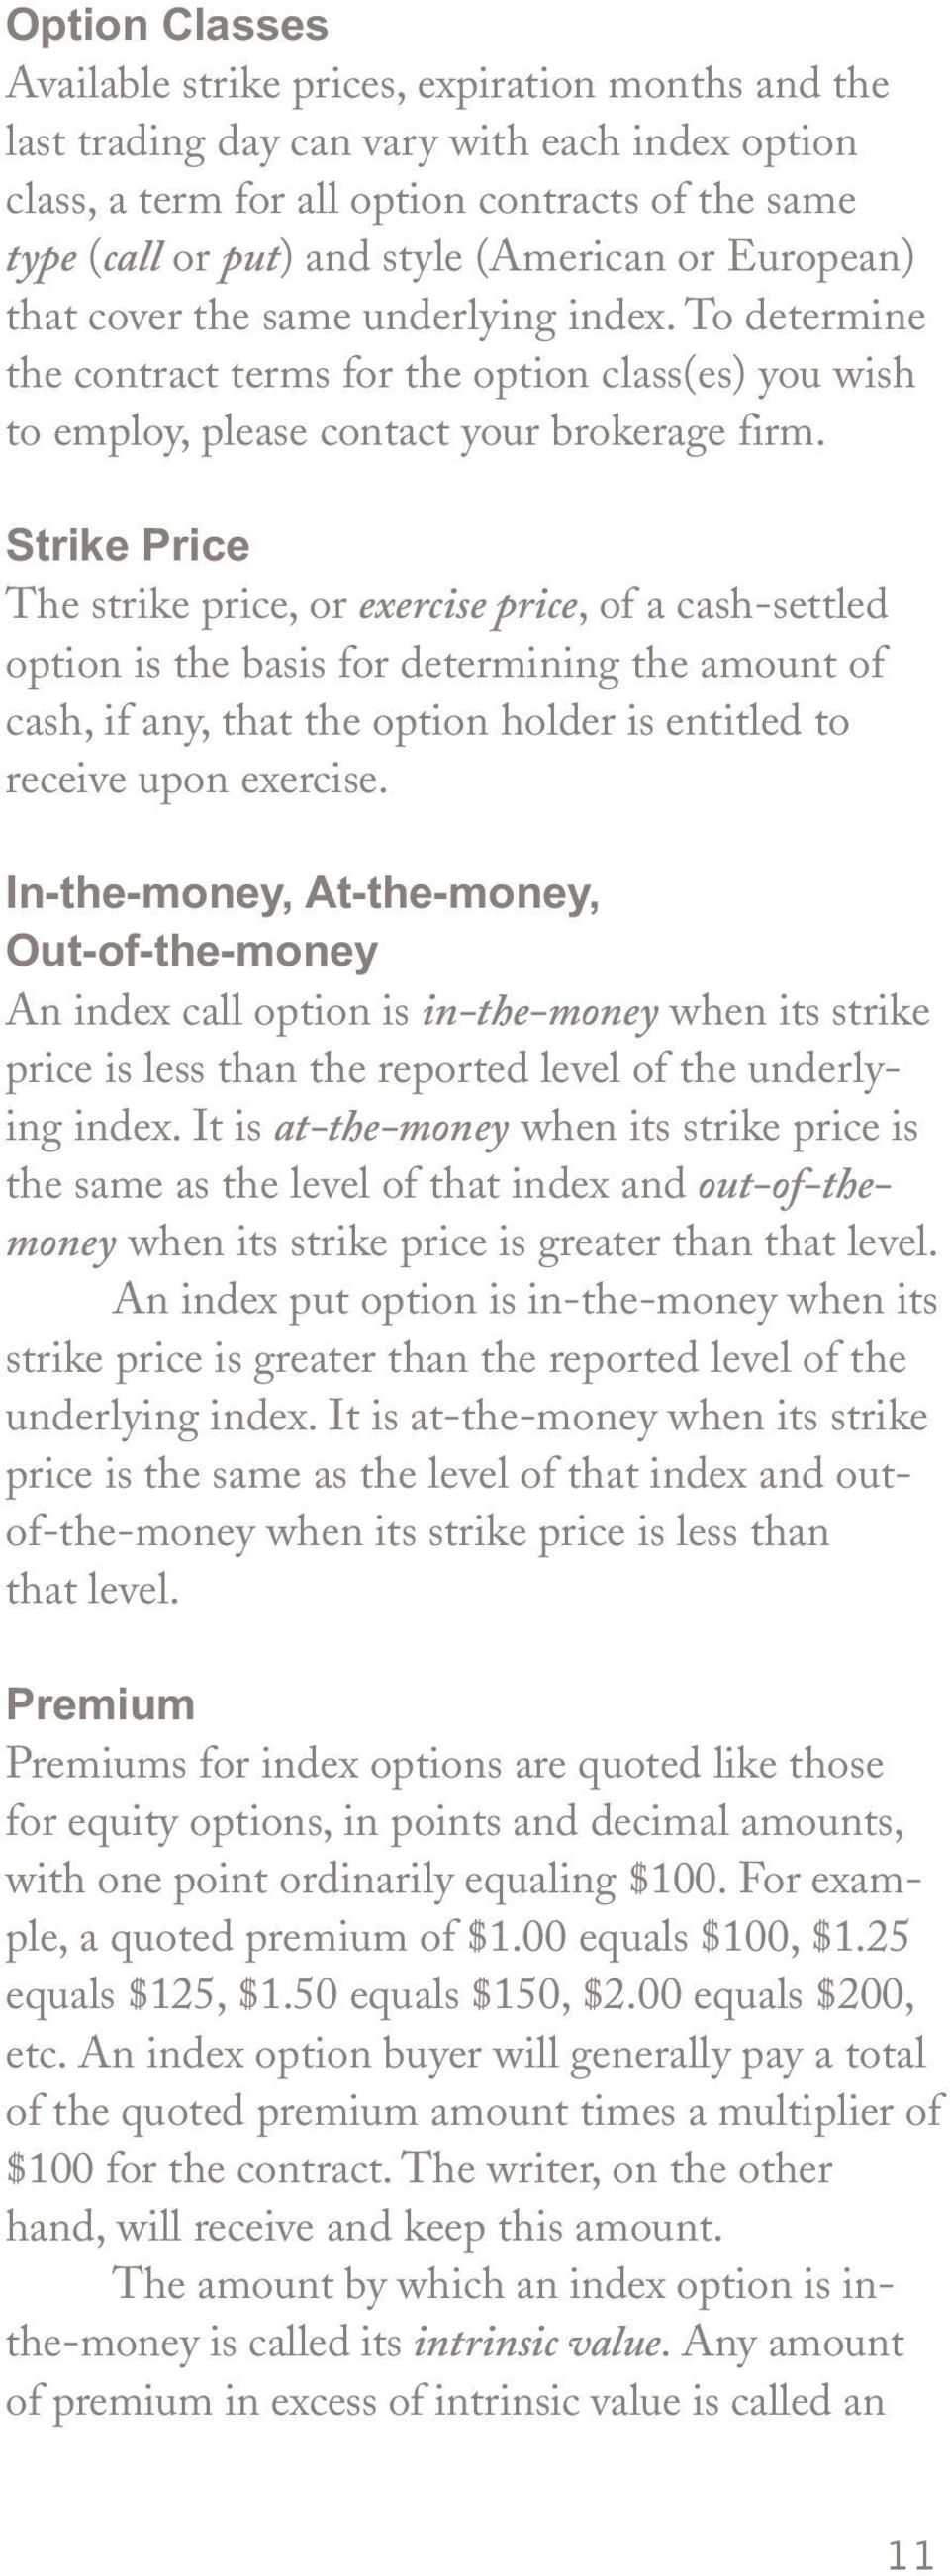 Strike Price The strike price, or exercise price, of a cash-settled option is the basis for determining the amount of cash, if any, that the option holder is entitled to receive upon exercise.